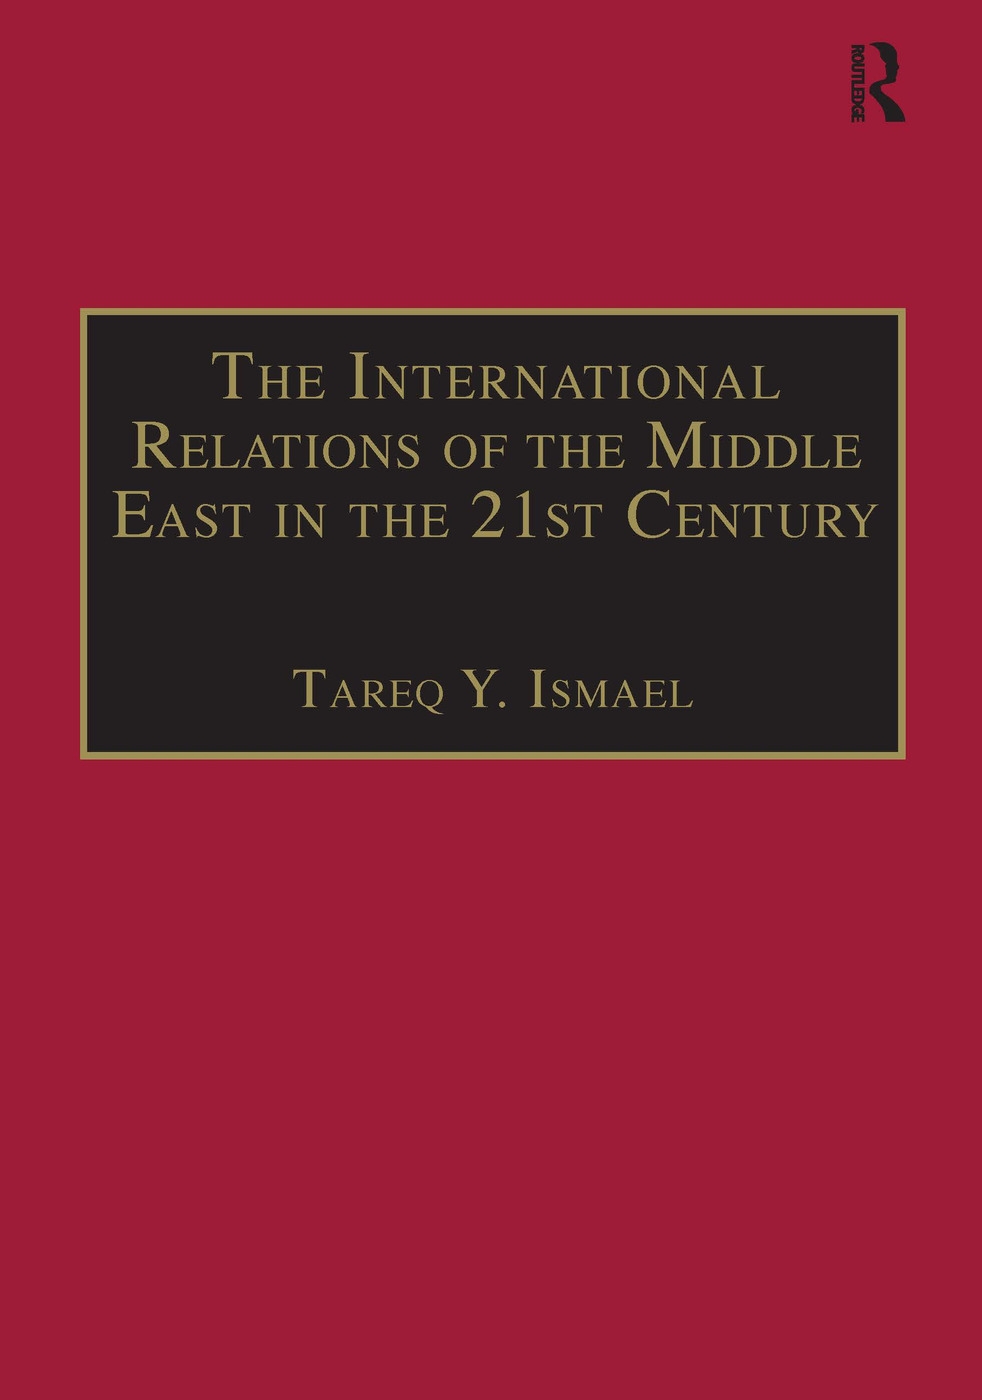 The International Relations of the Middle East in the 21st Century: Patterns of Continuity and Change